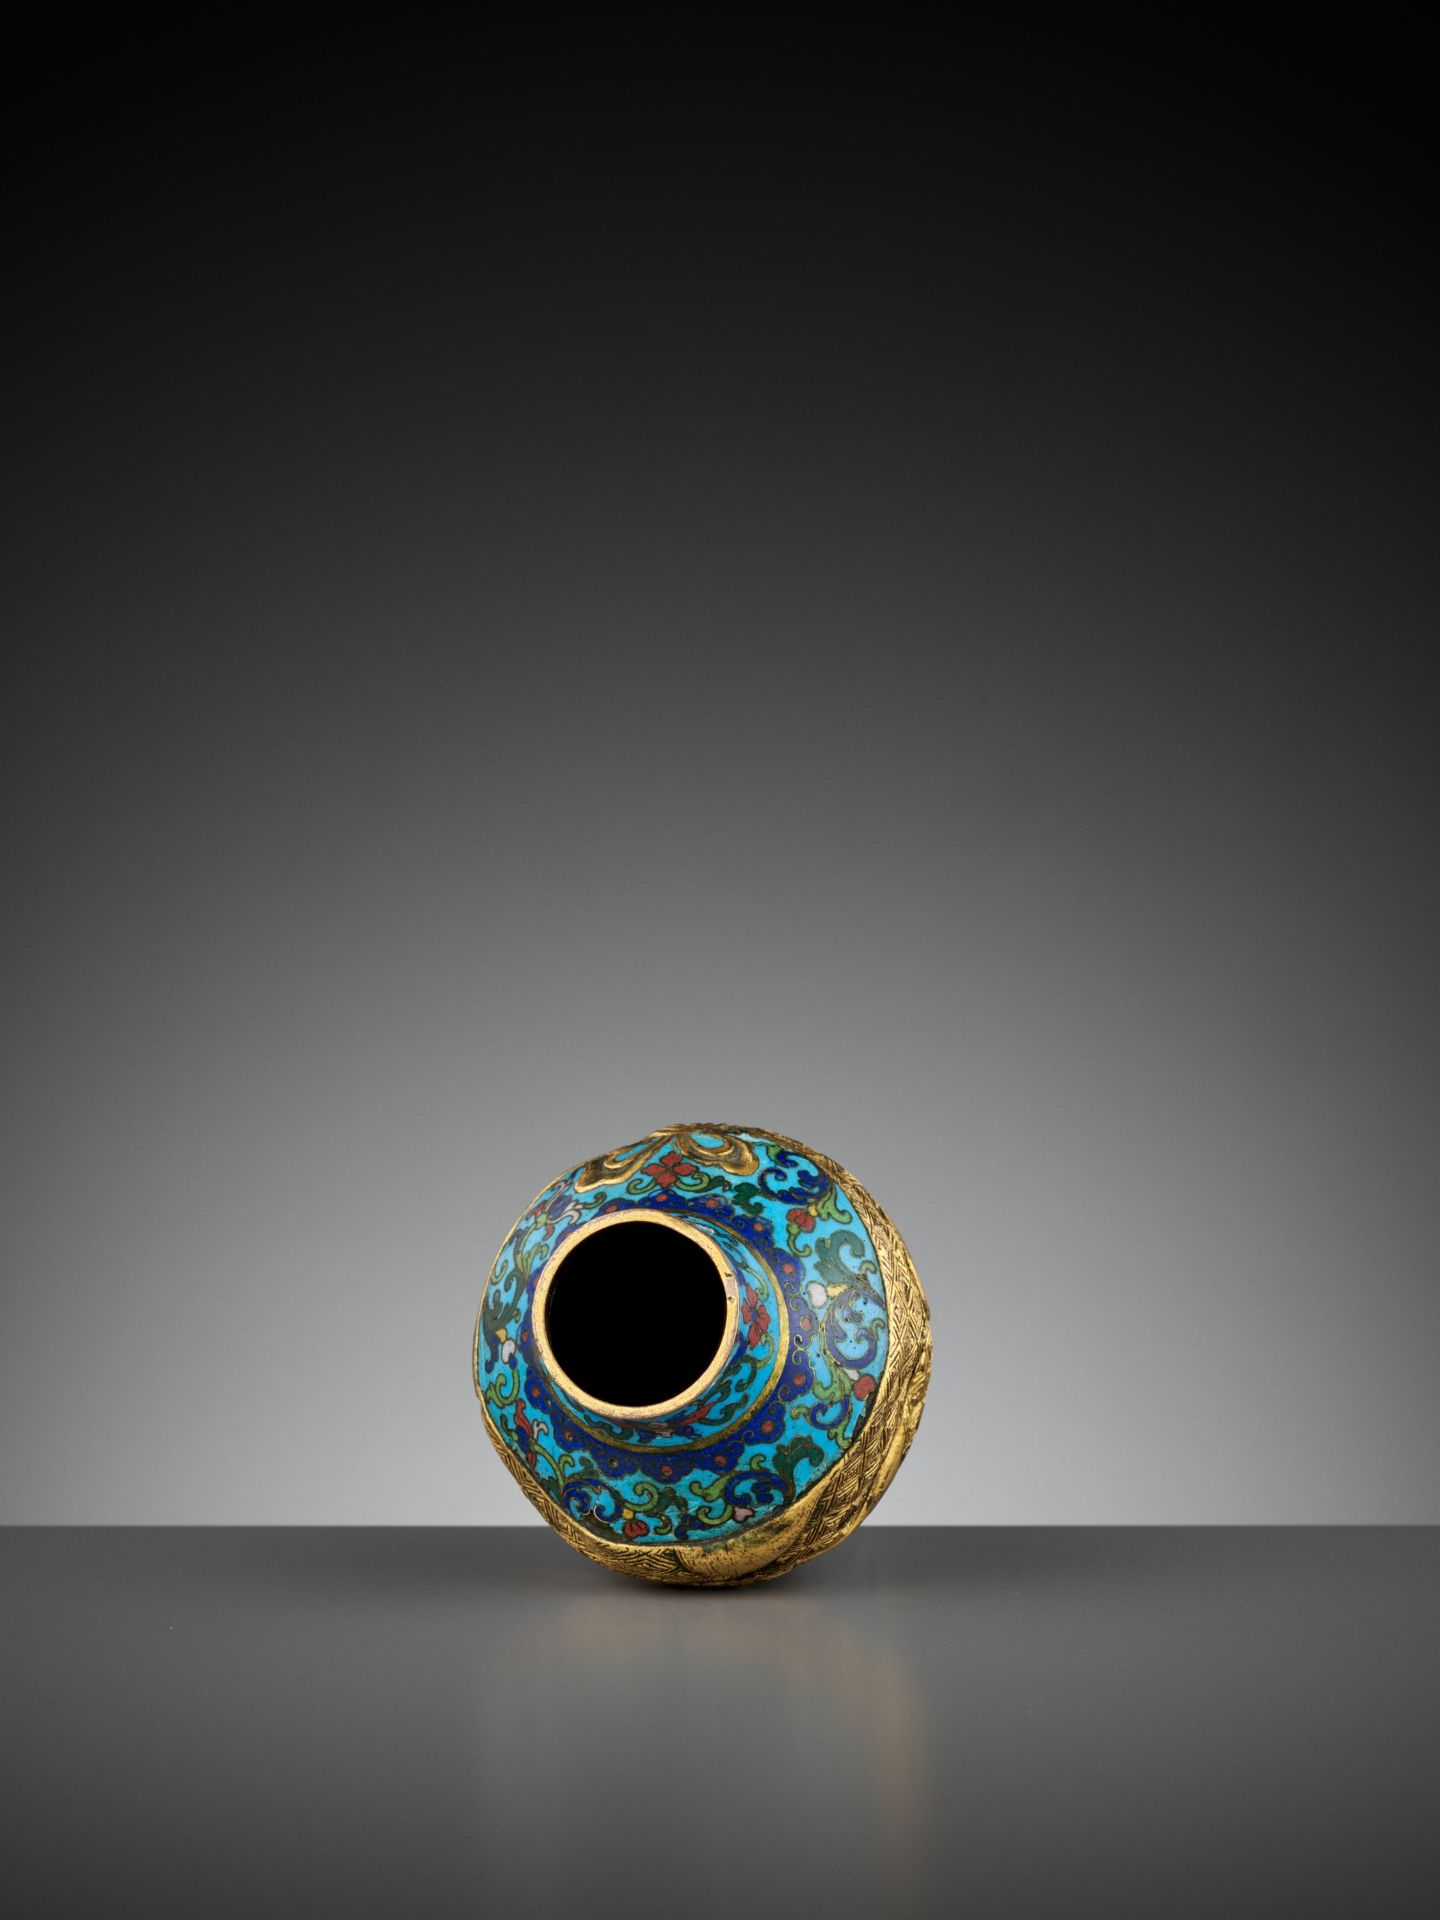 A RARE CLOISONNE ENAMEL 'SASH-TIED' BALUSTER VASE, ATTRIBUTED TO THE IMPERIAL WORKSHOPS, QIANLONG - Image 7 of 10